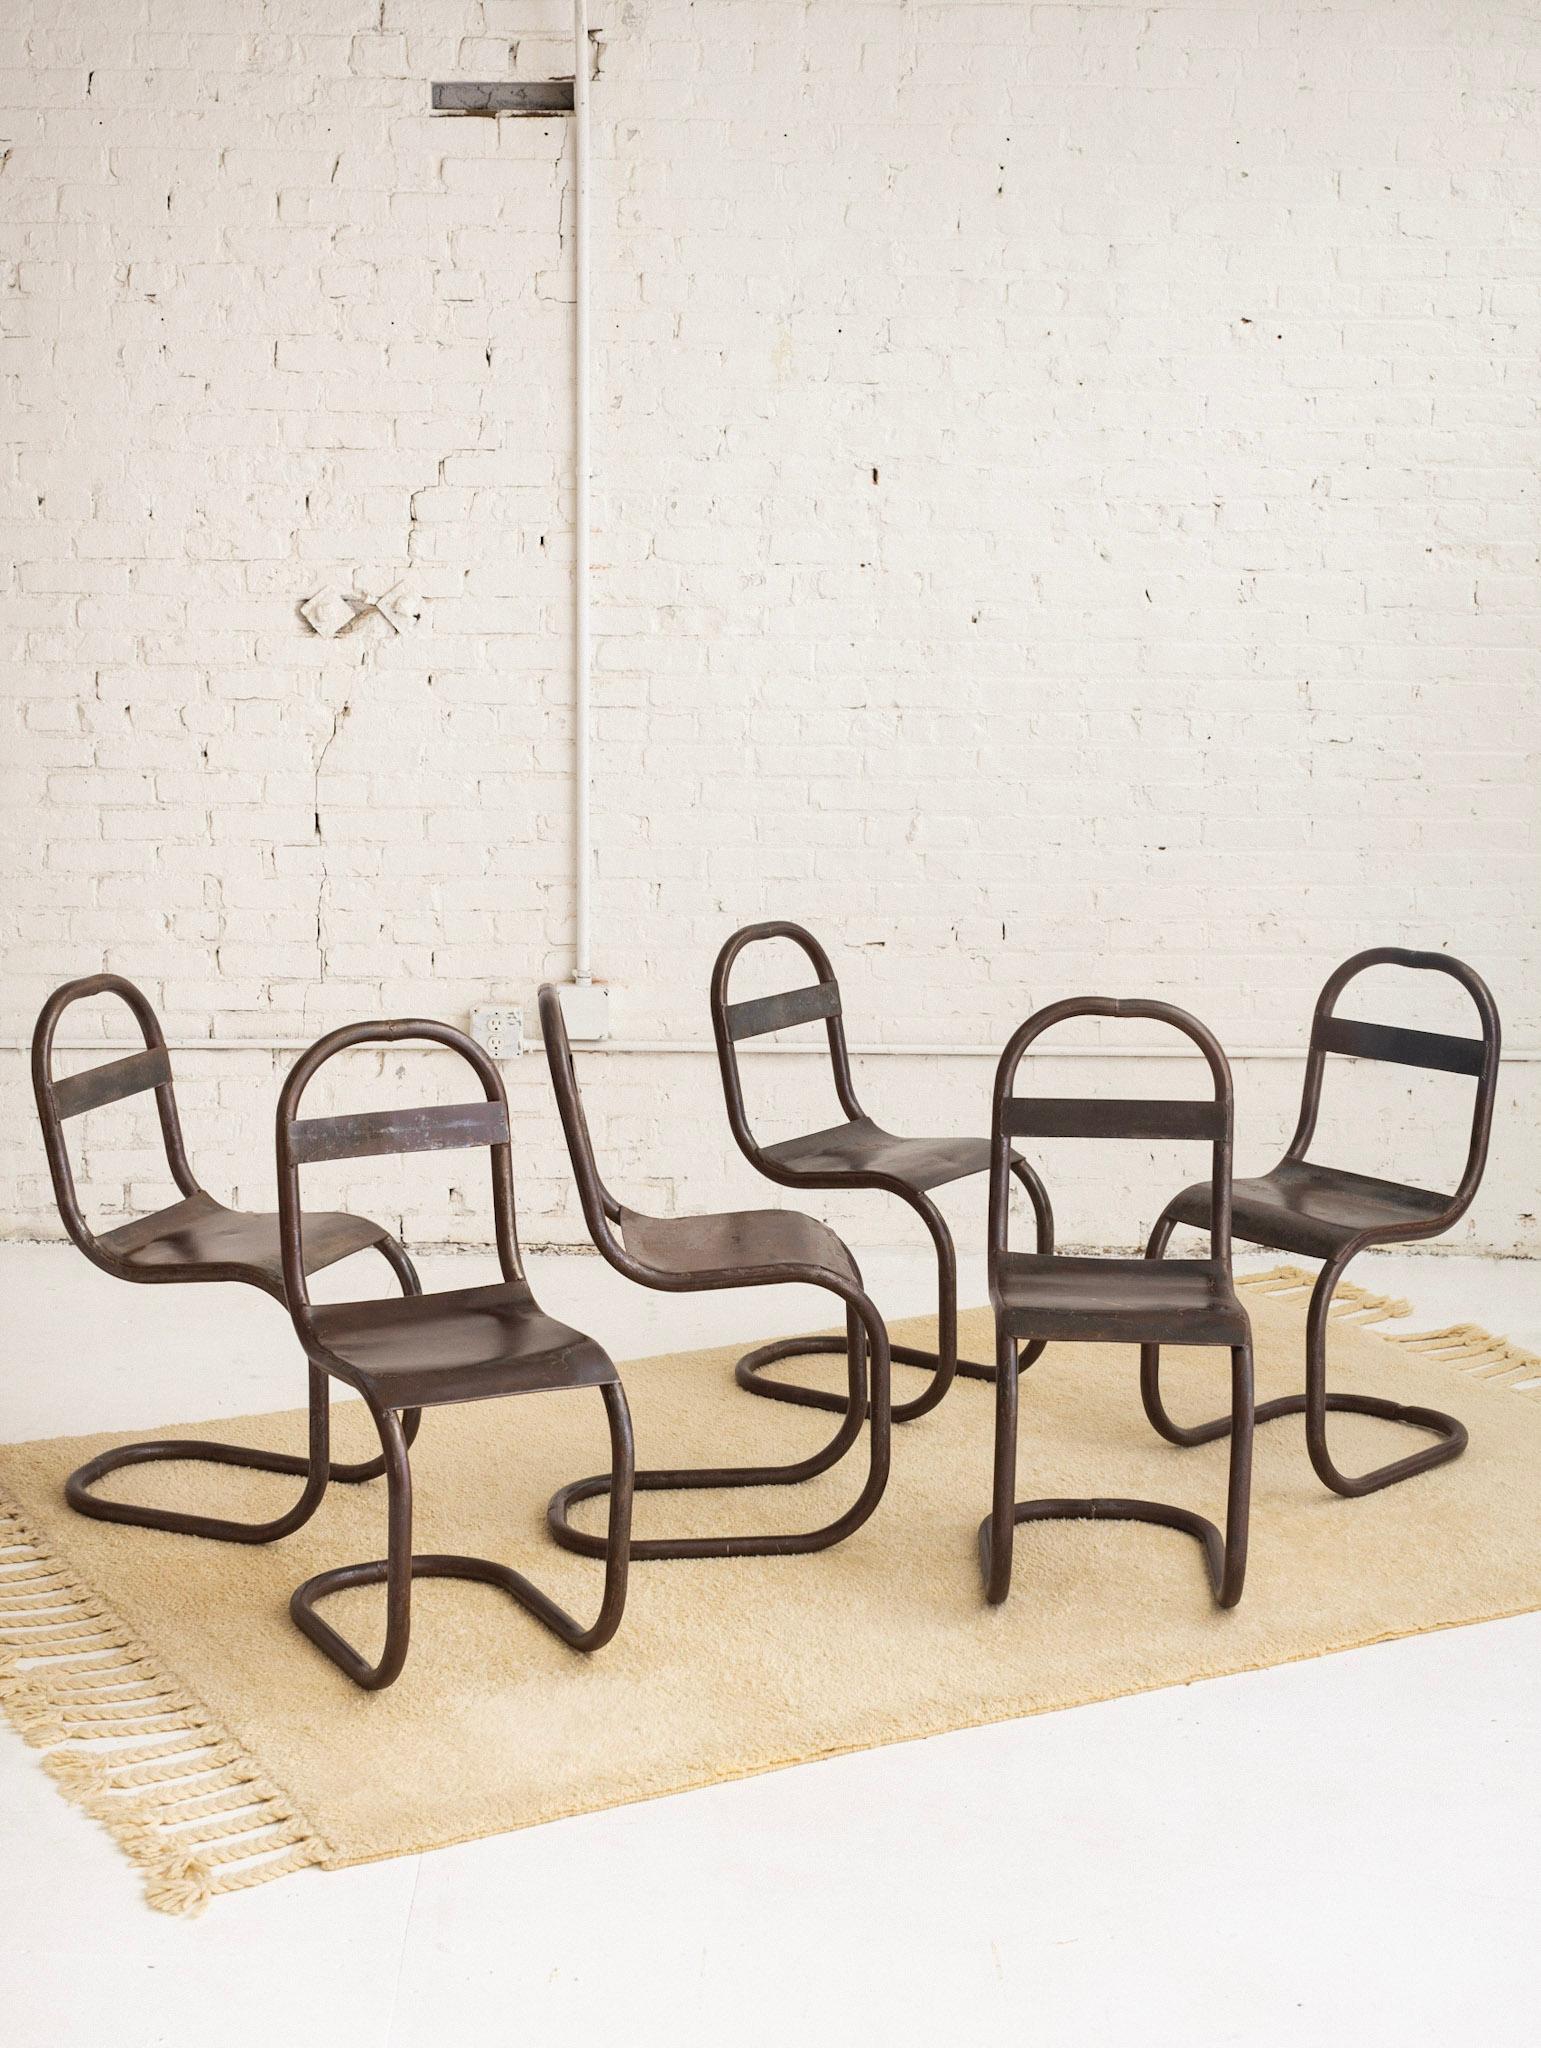 Set of 6 richly patinaed dining chairs. Studio made, exhibiting manufacturing details such as weld marks. Natural color variations throughout, ranging in rich brown tones. Cantilever silhouette. Each chair has its own unique markings and patina.